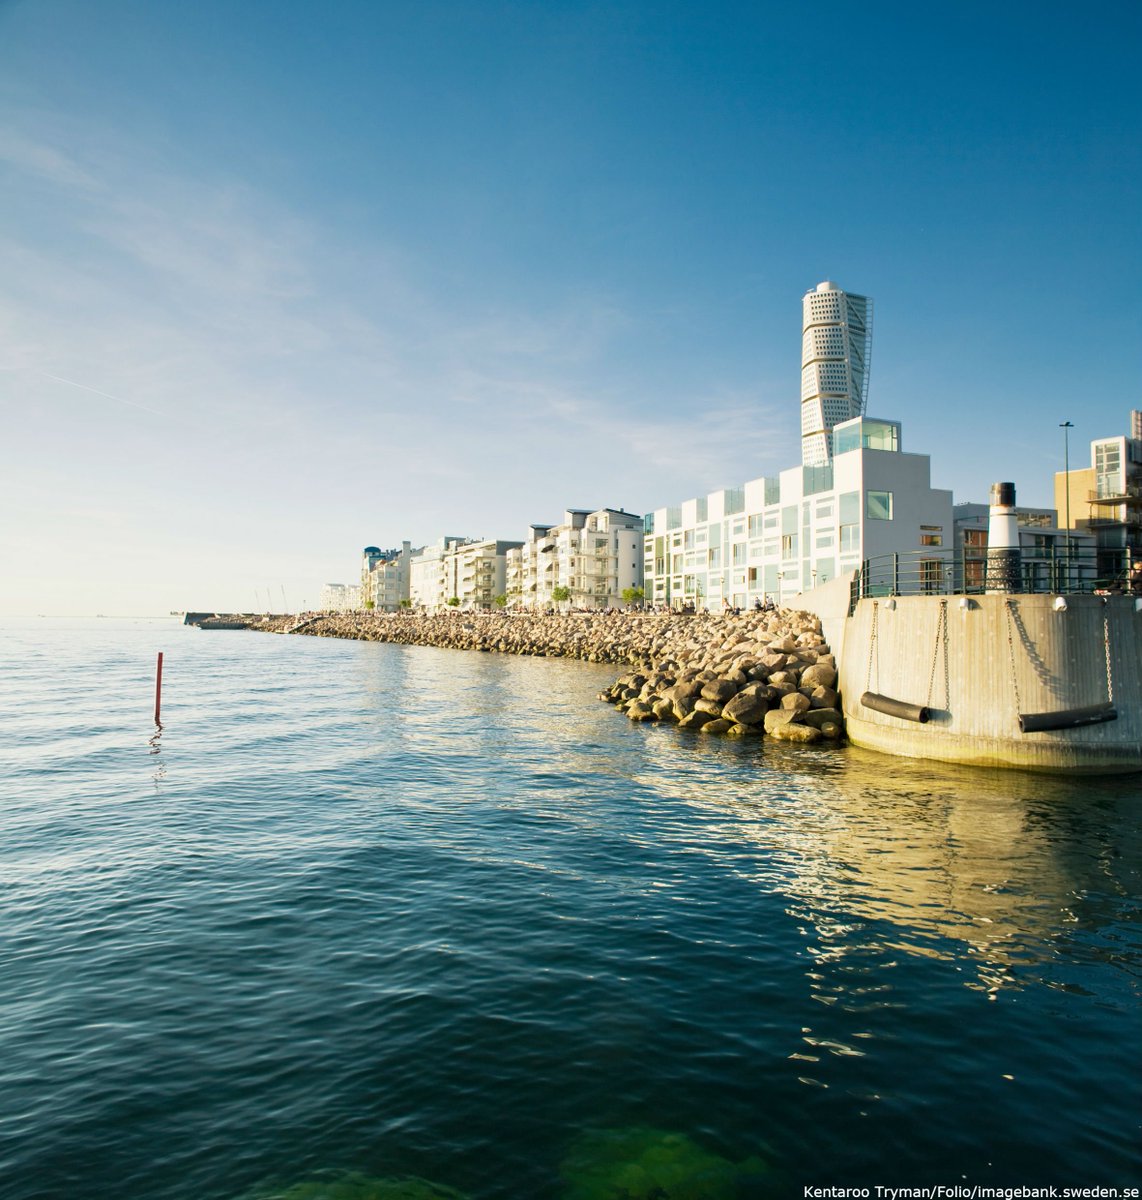 Good morning from Western Harbour in Malmö! Once a shipyard, now an attractive residential area. Often cited as Europe’s first carbon-neutral neighbourhood. #sustainability